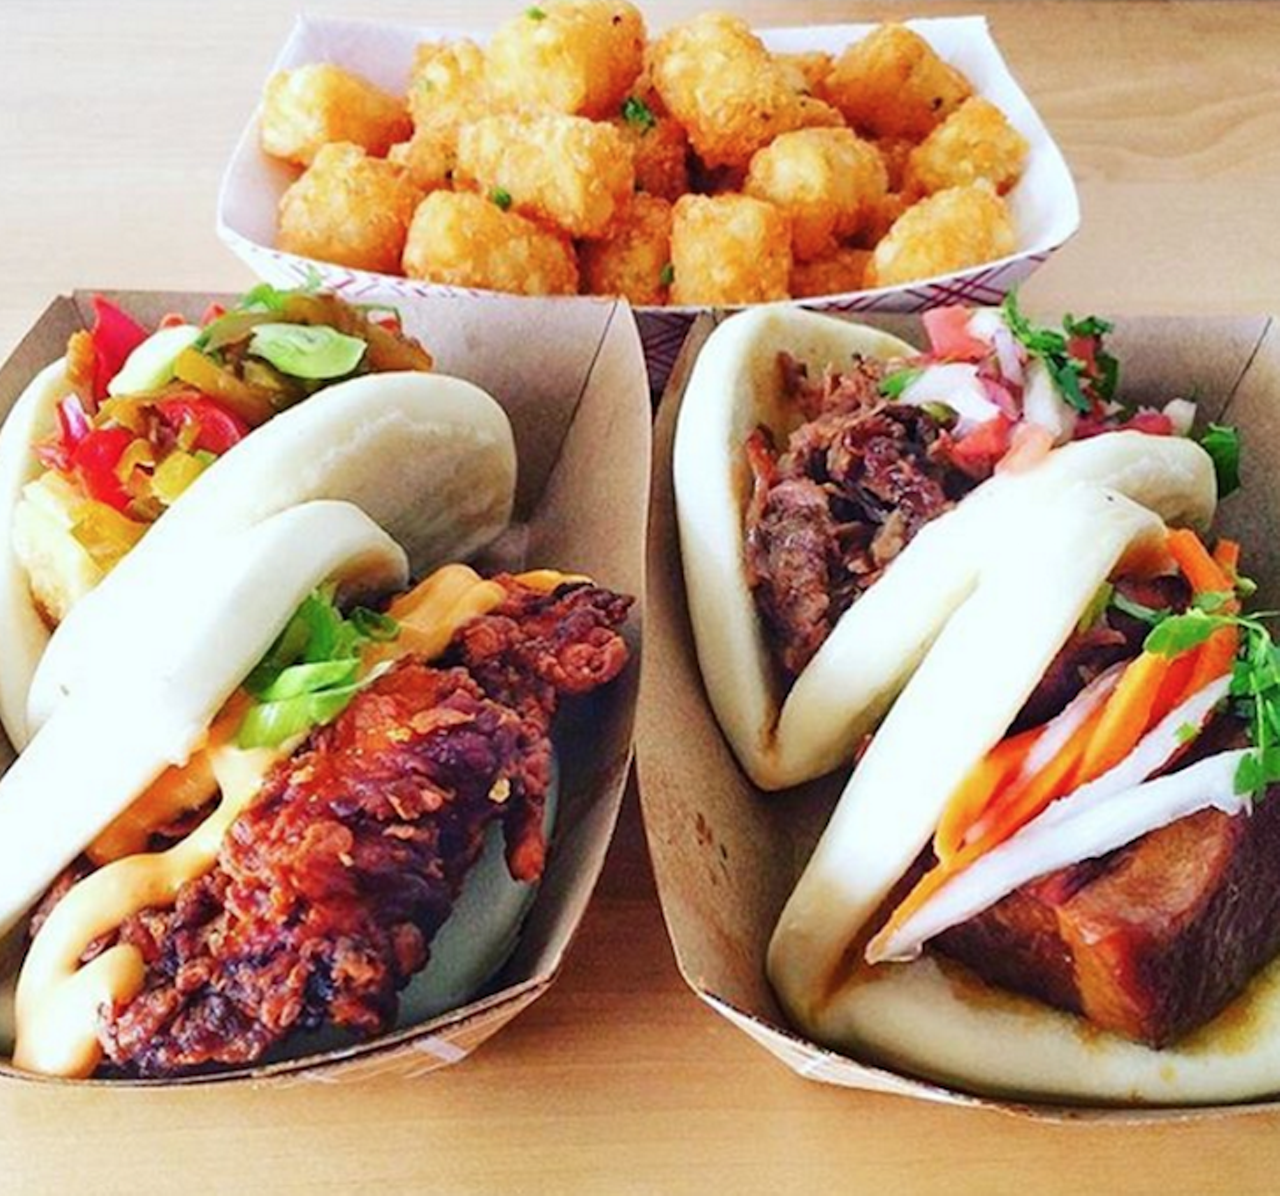  King Bao
710 N Mills Ave, Orlando, (407)-237-0013
This tiny restaurant packs a big taste and is the ideal lunch special for hungry customers ballin&#146; on a budget. If the variety of steamy, soft bun baos isn&#146;t enough to satisfy you, the truffle tots definitely will. 
Photo via kokocooks/Instagram